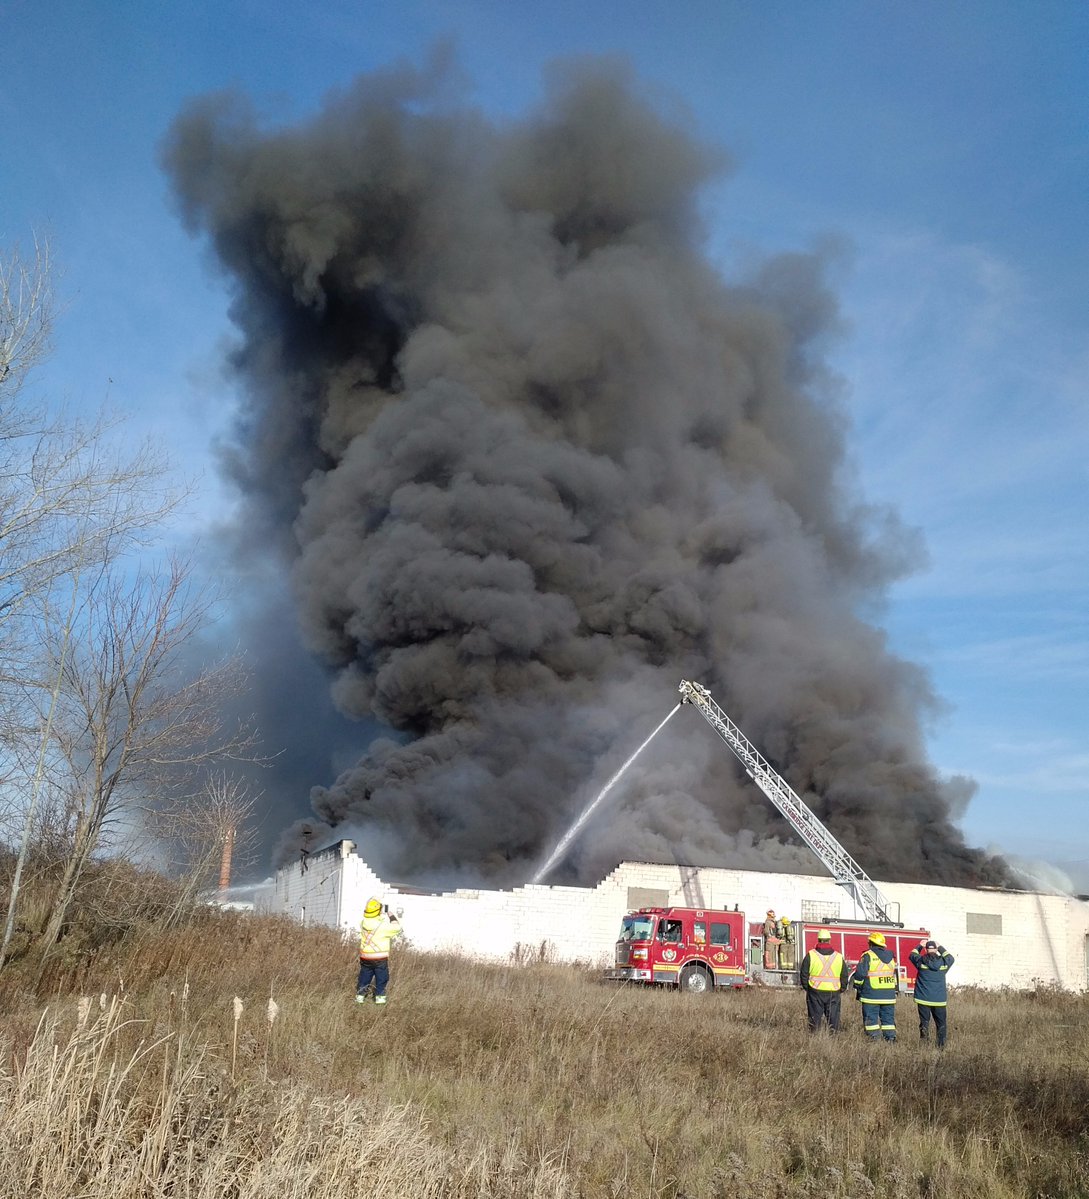 Emergency crews battled a large factory fire in the Hespeler neighbourhood of Cambridge Monday afternoon.